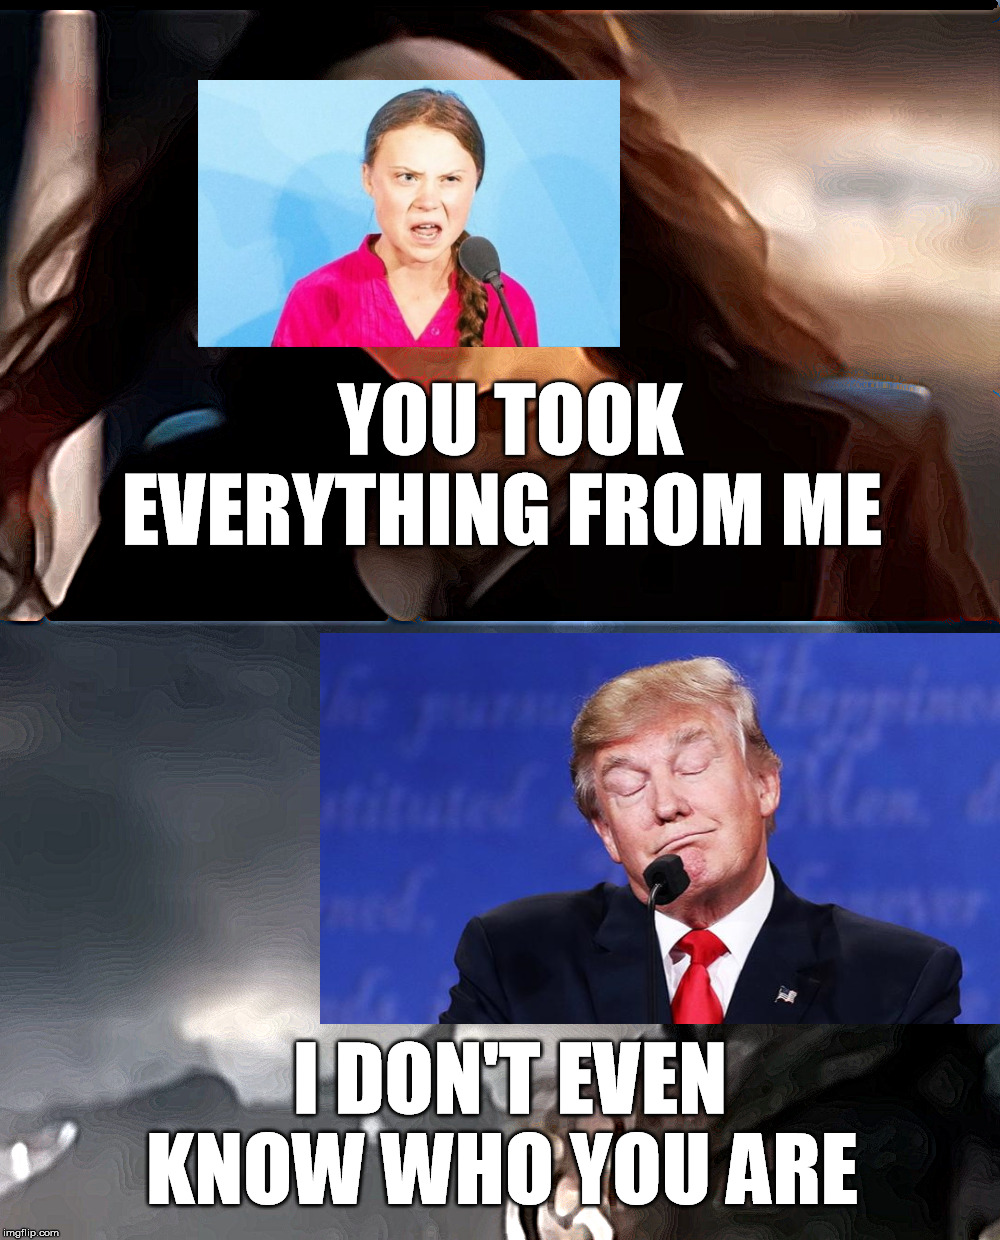 Donald Trump Took Everything from Greta Thunberg | YOU TOOK EVERYTHING FROM ME; I DON'T EVEN KNOW WHO YOU ARE | image tagged in thanos i don't even know who you are,greta thunberg,donald trump,politics,satire,funny trump meme | made w/ Imgflip meme maker